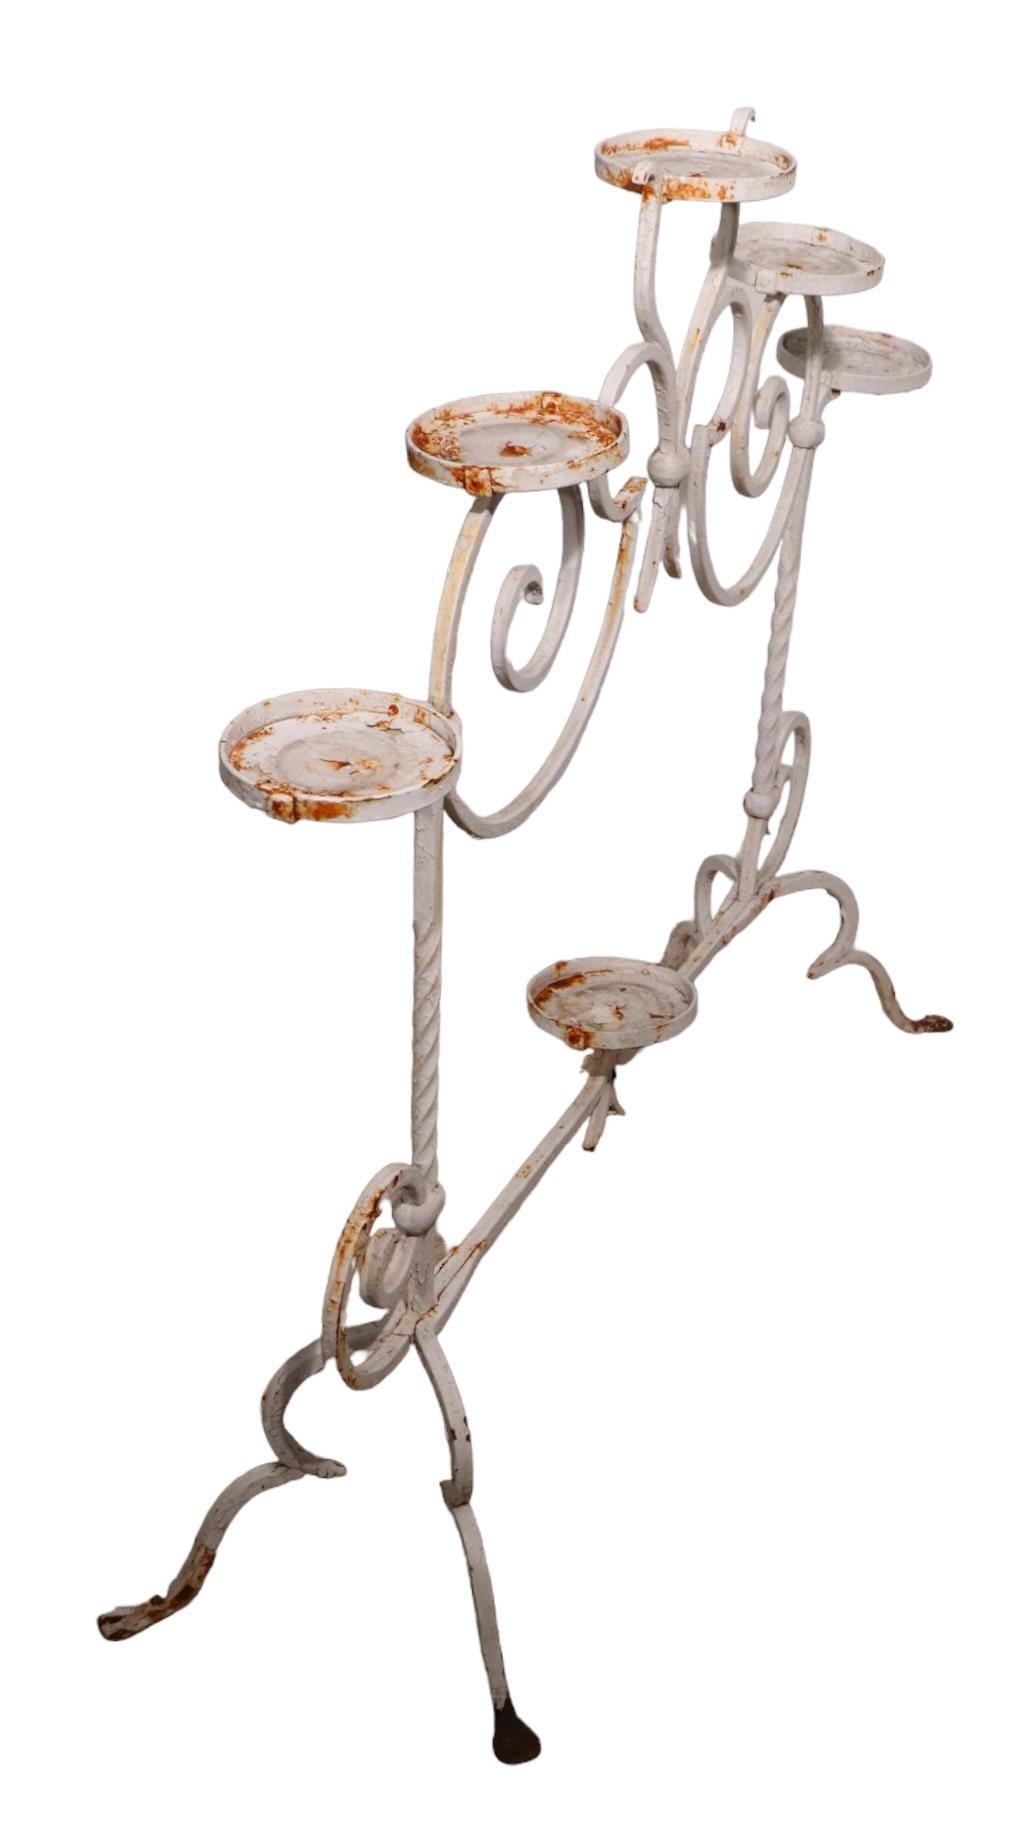 Charming Art Deco wrought iron plant stand having six disk form pot holder surfaces ( 5 in. diameter. ) with a decorative frame structure. The stand is in very good condition, free of breaks, damage or repairs. Currently in later, but not new, white